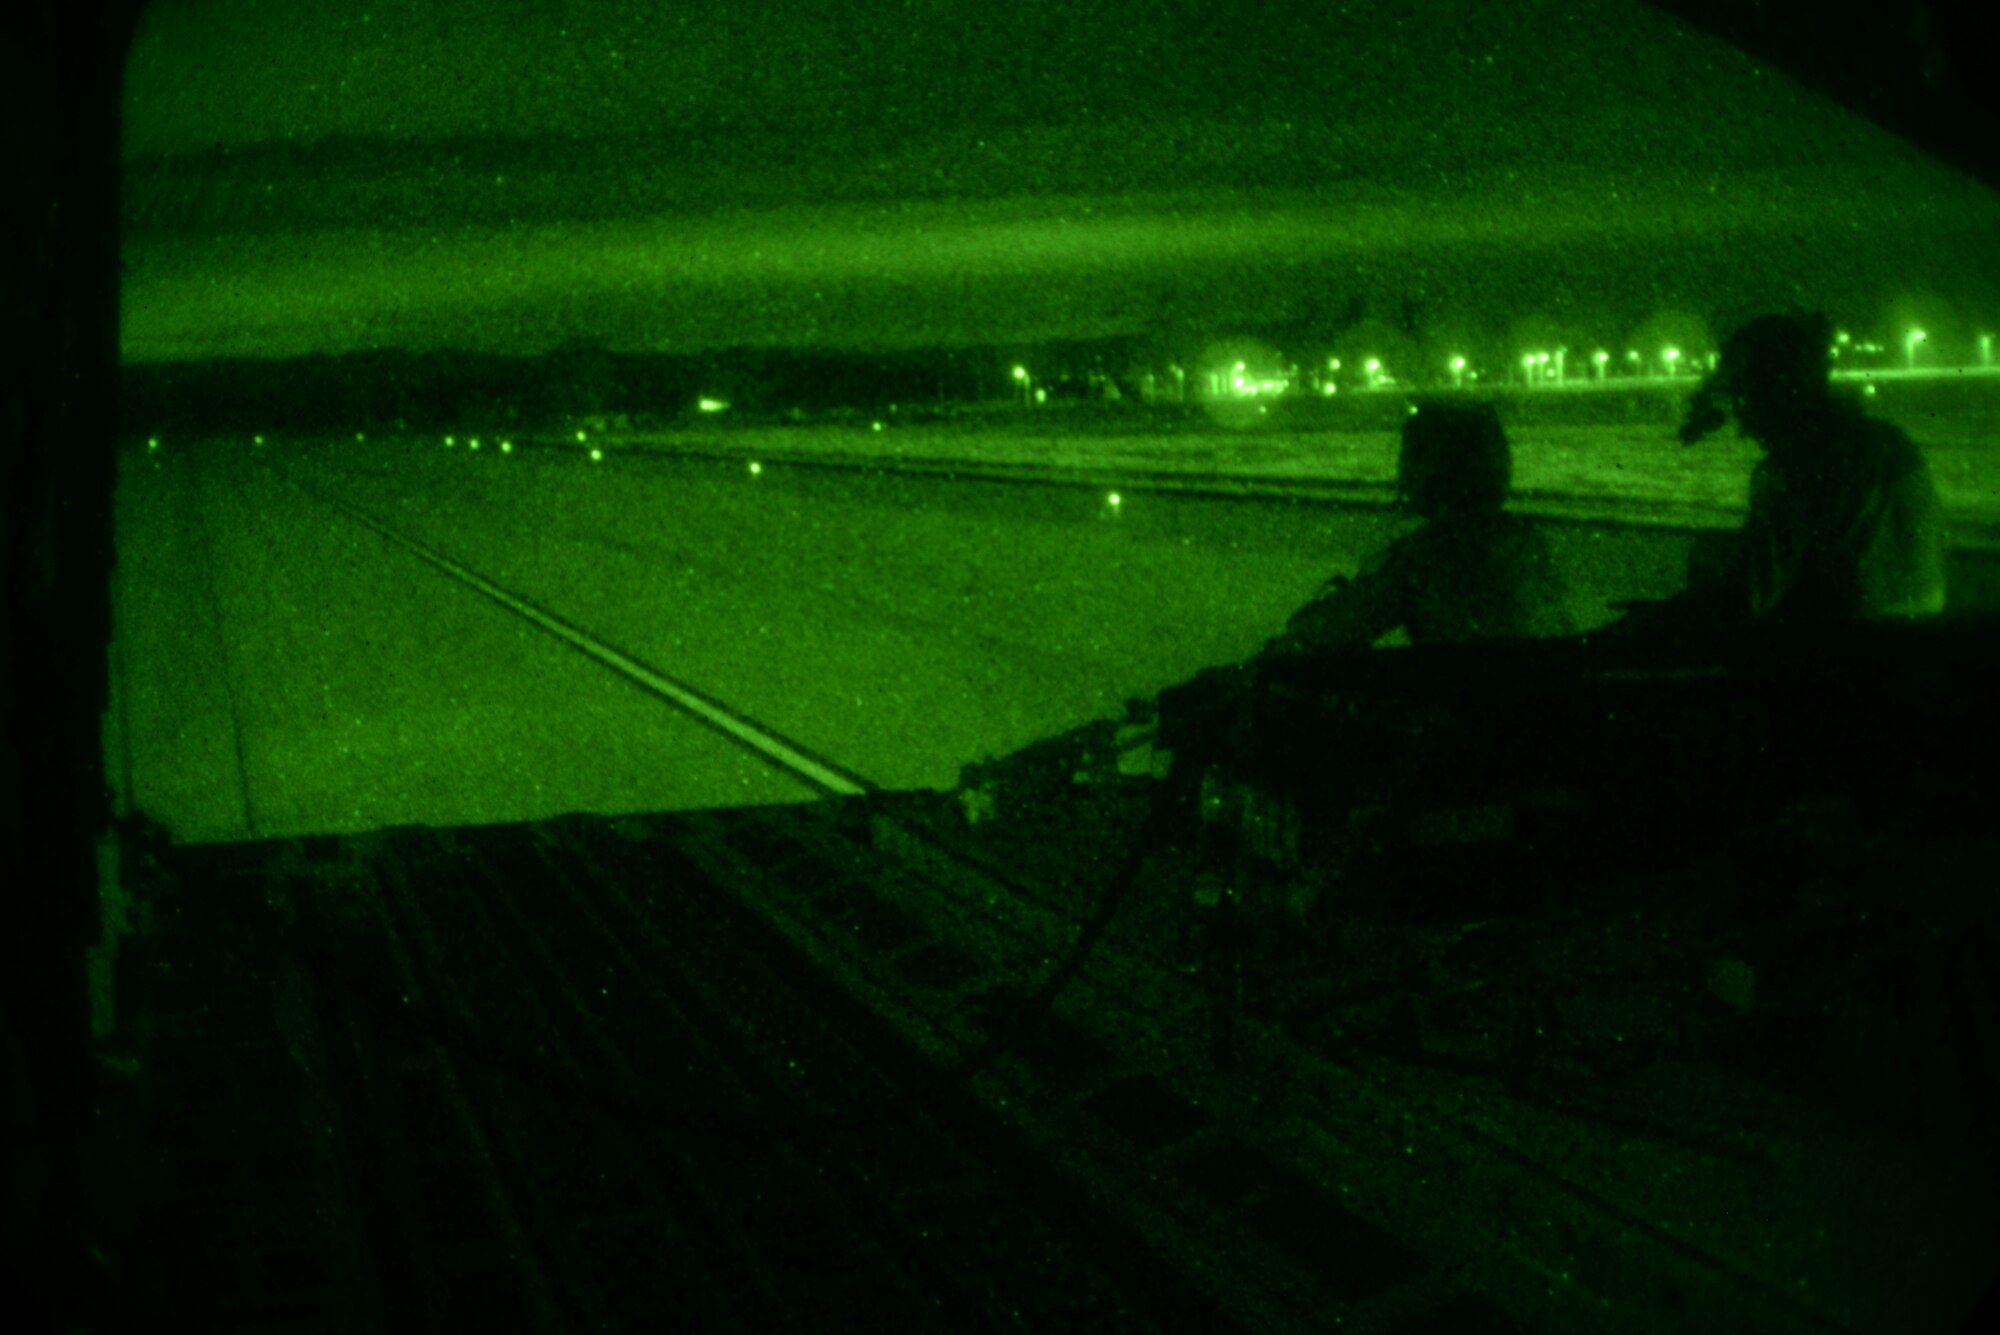 Master Sgt. Shevaun Reighter, 21st Airlift Squadron instructor loadmaster, trains Master Sgt. Ronald Strayhorne, 21st AS loadmaster, March 2 at Travis Air Force Base, California. Reighter and Strayhorne donned night vision goggles and practiced combat offloads to simulate contingency operations. (U.S. Air Force photo by Airman 1st Class Amber Carter) 